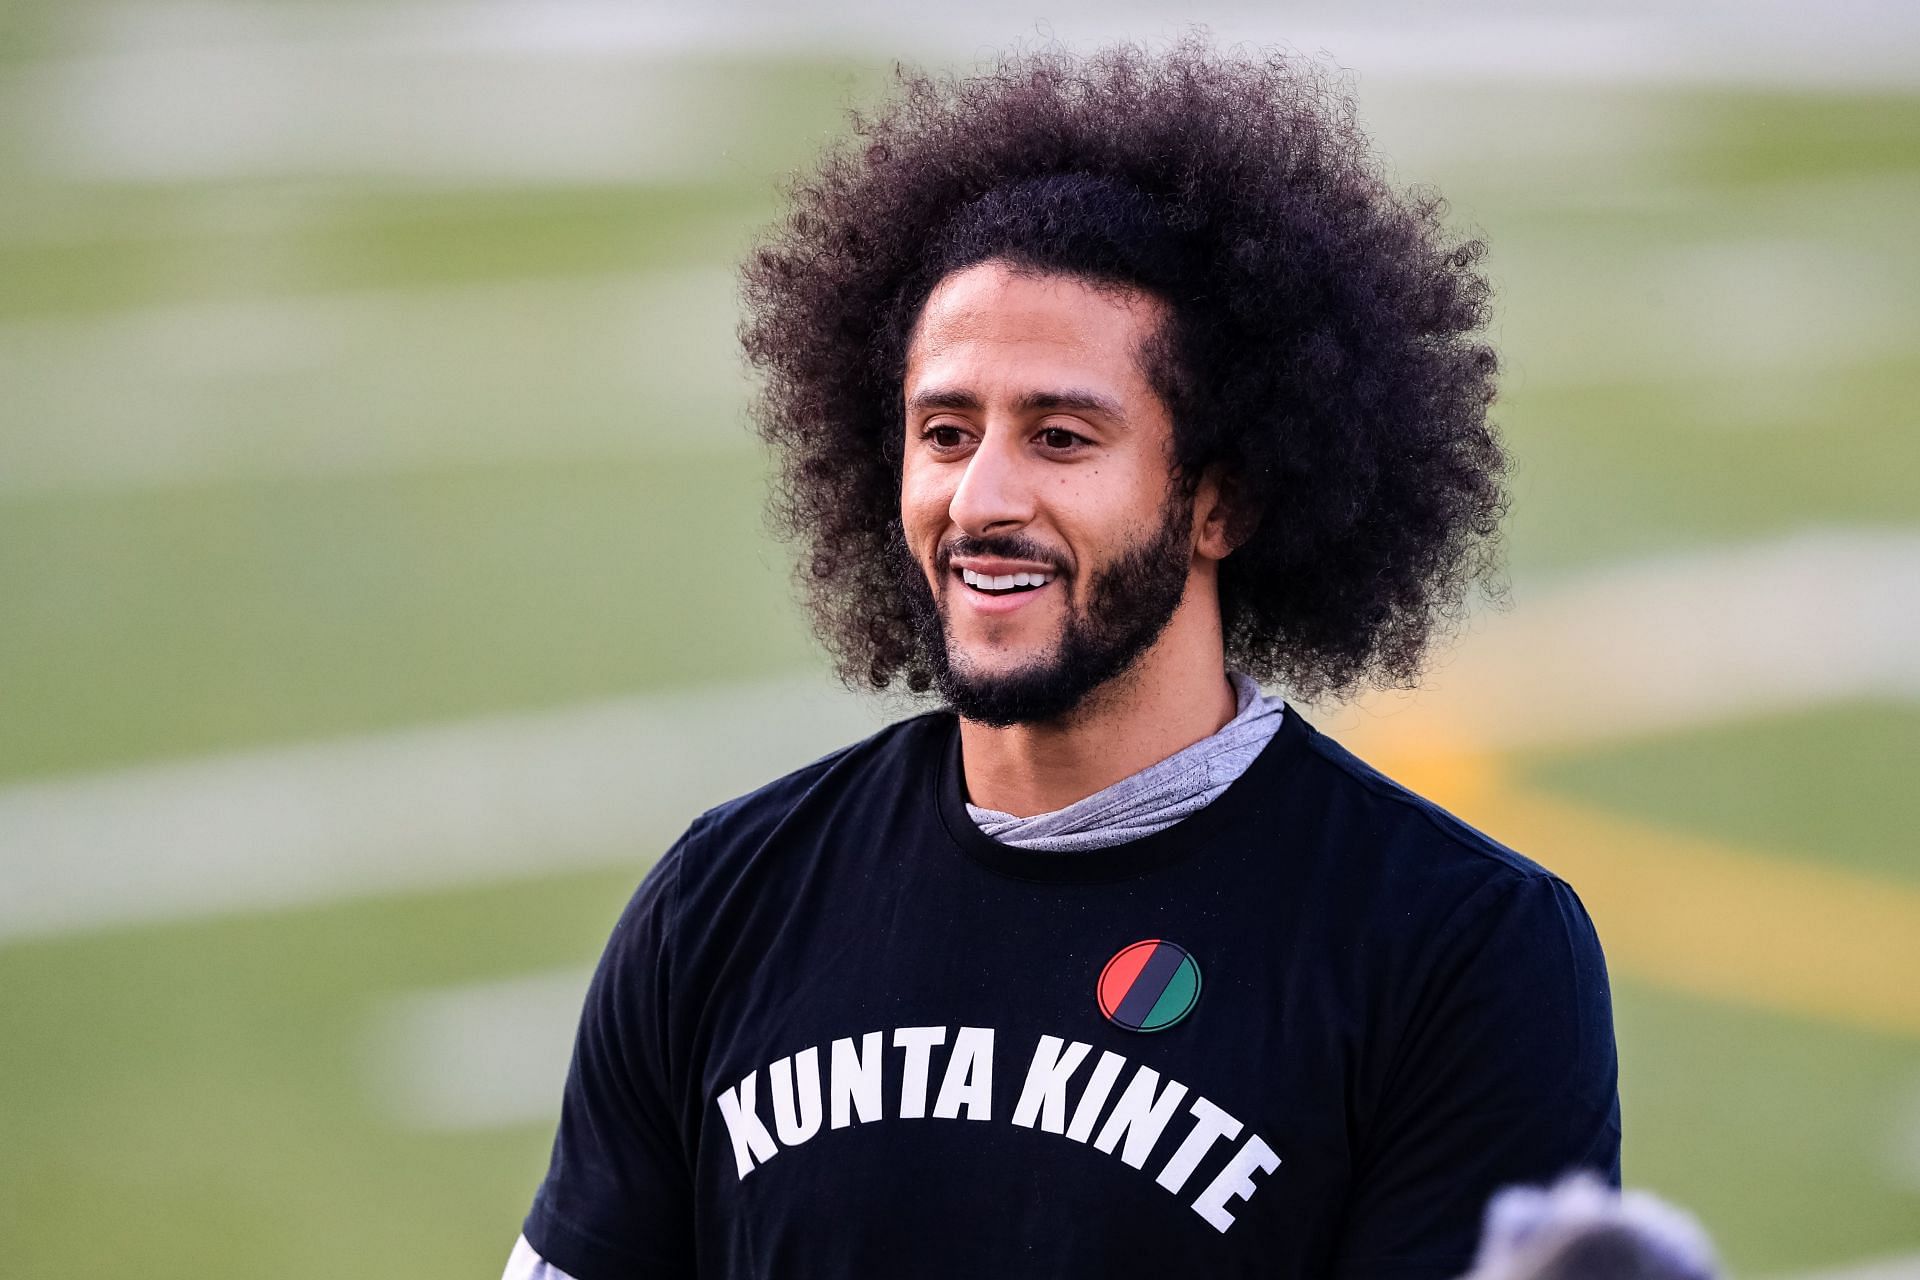 Colin Kaepernick has worked out several times this offseason ahead of possible NFL return